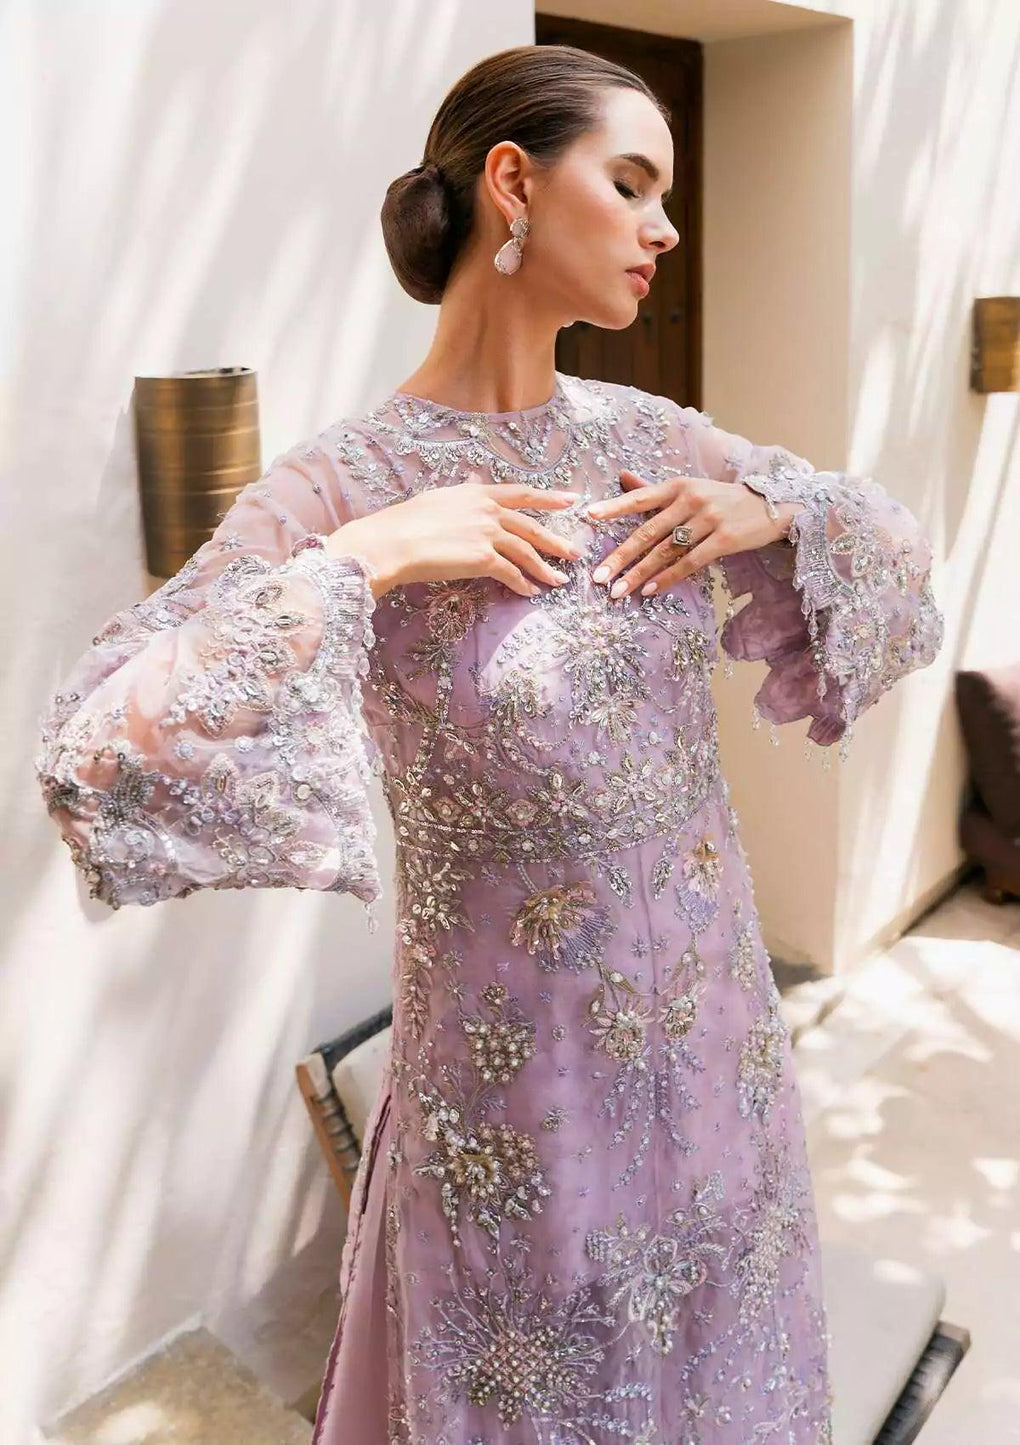 EEW-01-ESFIR-Elaf-premium-Evara-chapter-2-Wedding-Unstiched-Collection-Inlcludes-Luxury-Formal-Designs-and-Bridal-Dresses-Amazing-OnlineShopping-Experience-Esfir-Lilac-Design-PakistaniFormaldresses-and-asianbridaldresses-bridaldresses